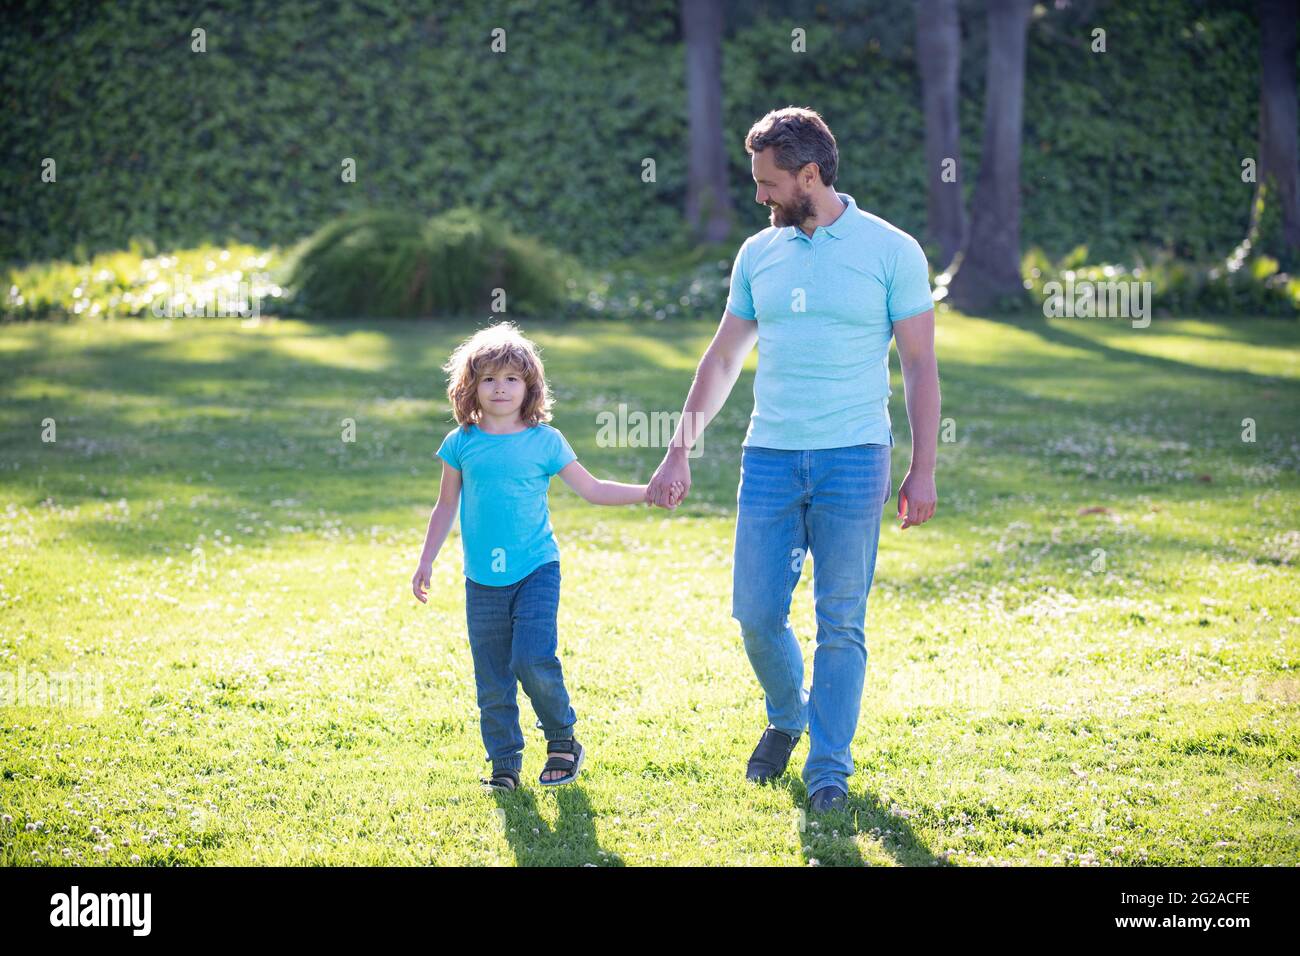 happy family value. childhood and parenthood. parent leads little child boy on grass. Stock Photo